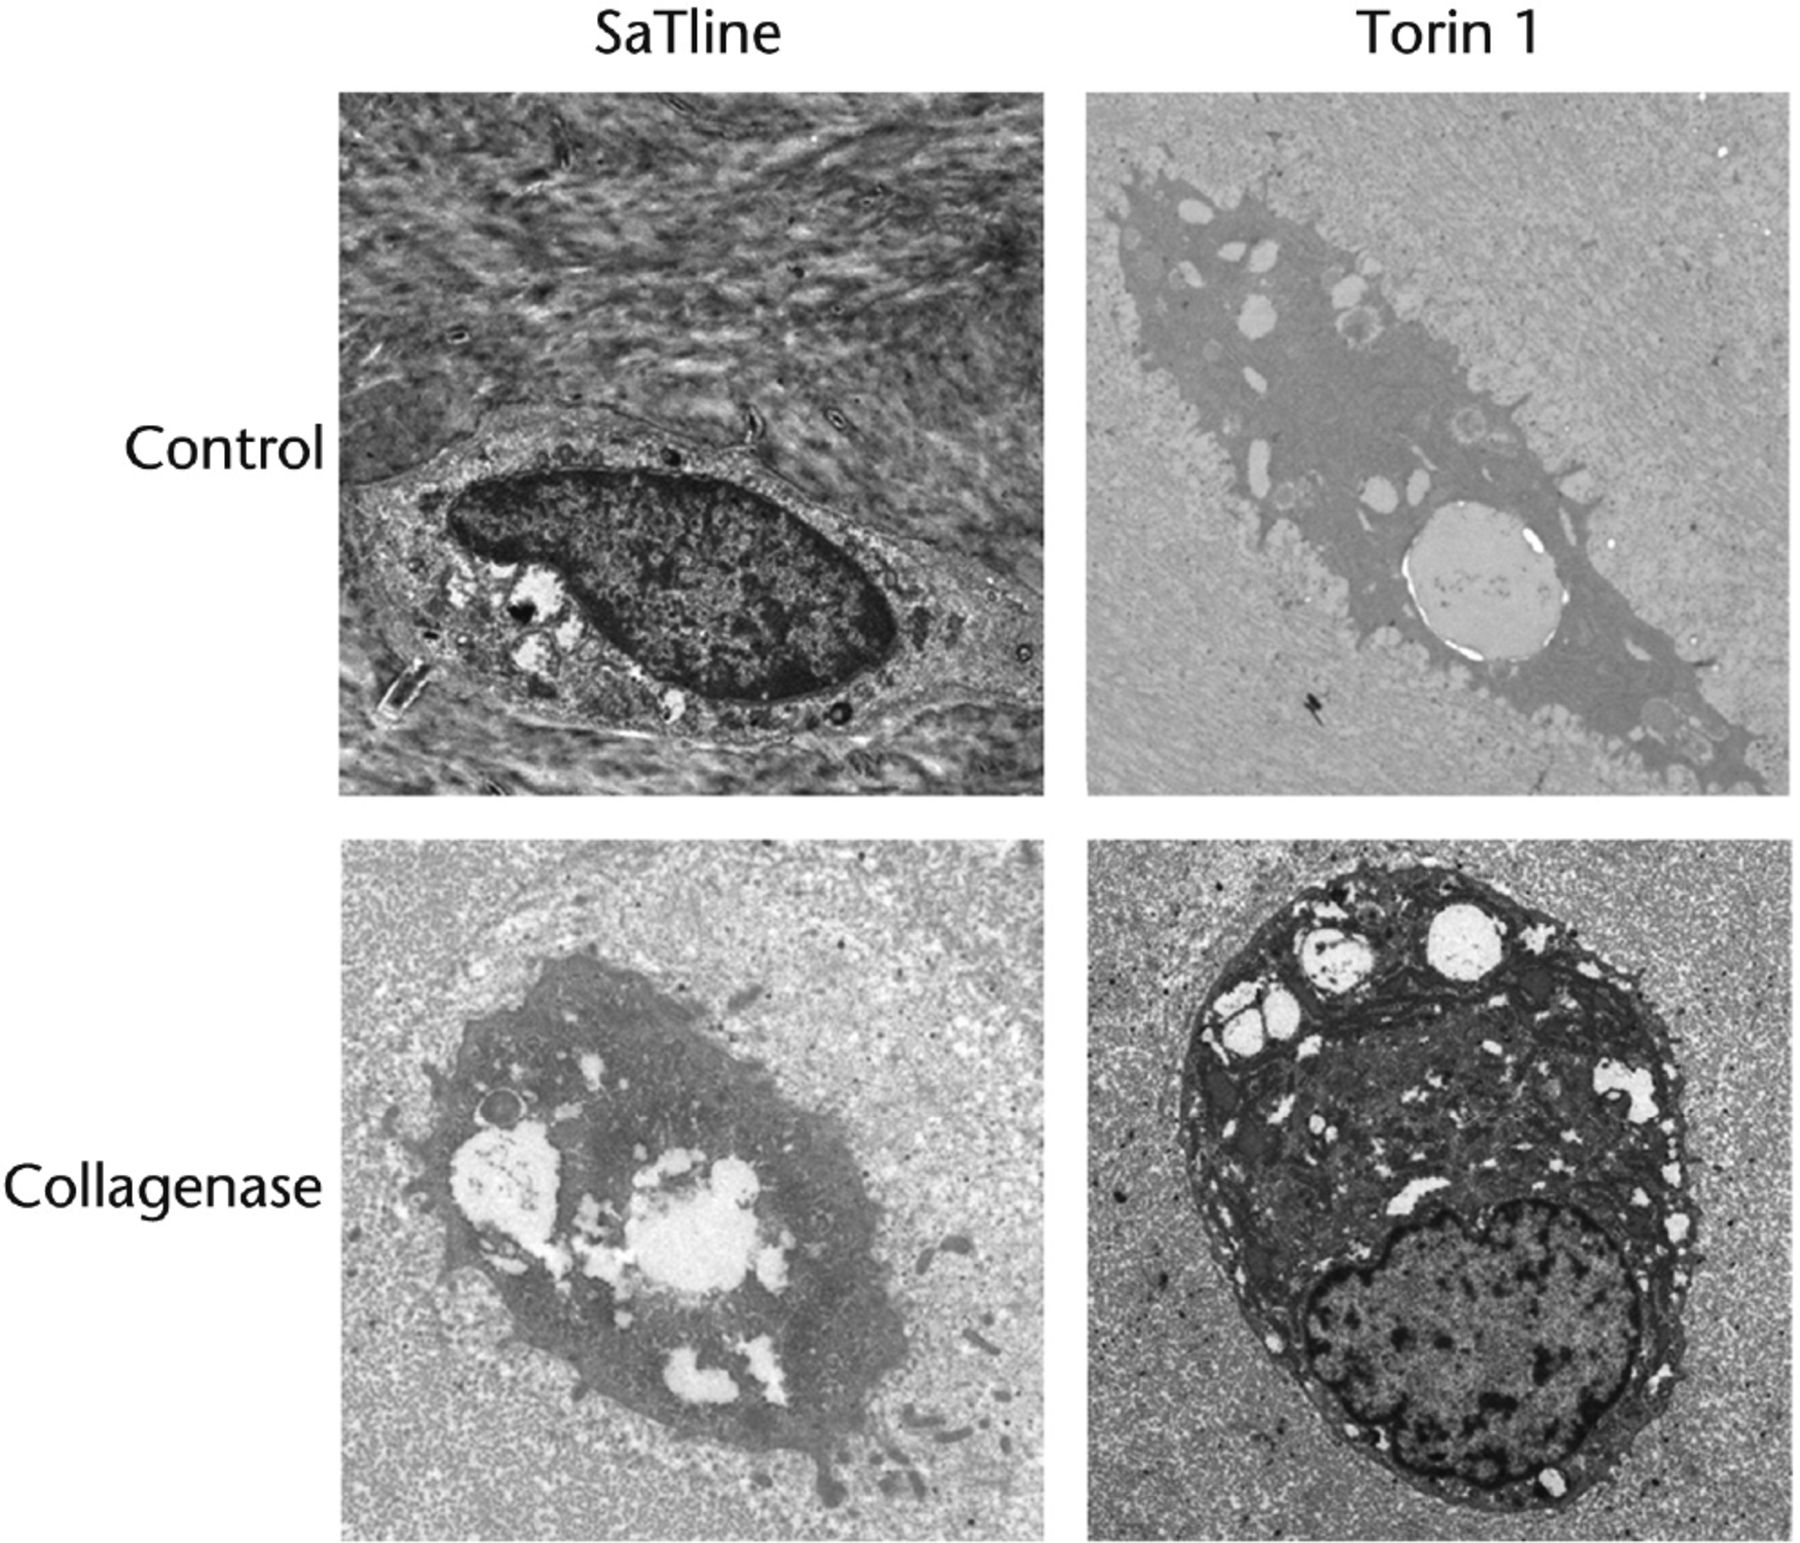 Fig. 2 
            TEM observation. Many more autophagic vacuoles were observed in chondrocytes from Torin 1-treated rabbits than from saline-treated rabbits. In control rabbits treated with saline or Torin 1, chondrocytes located in the lacunae contained autophagic vesicles and were not degenerated. In addition, Golgi apparatus and abundant rough endoplasmic reticulum (RER) were also observed. Chondrocytes from saline-treated rabbits were condensed with absent nuclei and several autophagosomes in the cytoplasm at eight weeks after collagenase injection, and some cell debris were seen in the lacunae. In contrast, chondrocytes from Torin 1-treated rabbits had nuclei and condensed chromatin at eight weeks after collagenase injection (Bar, 1μm).
          